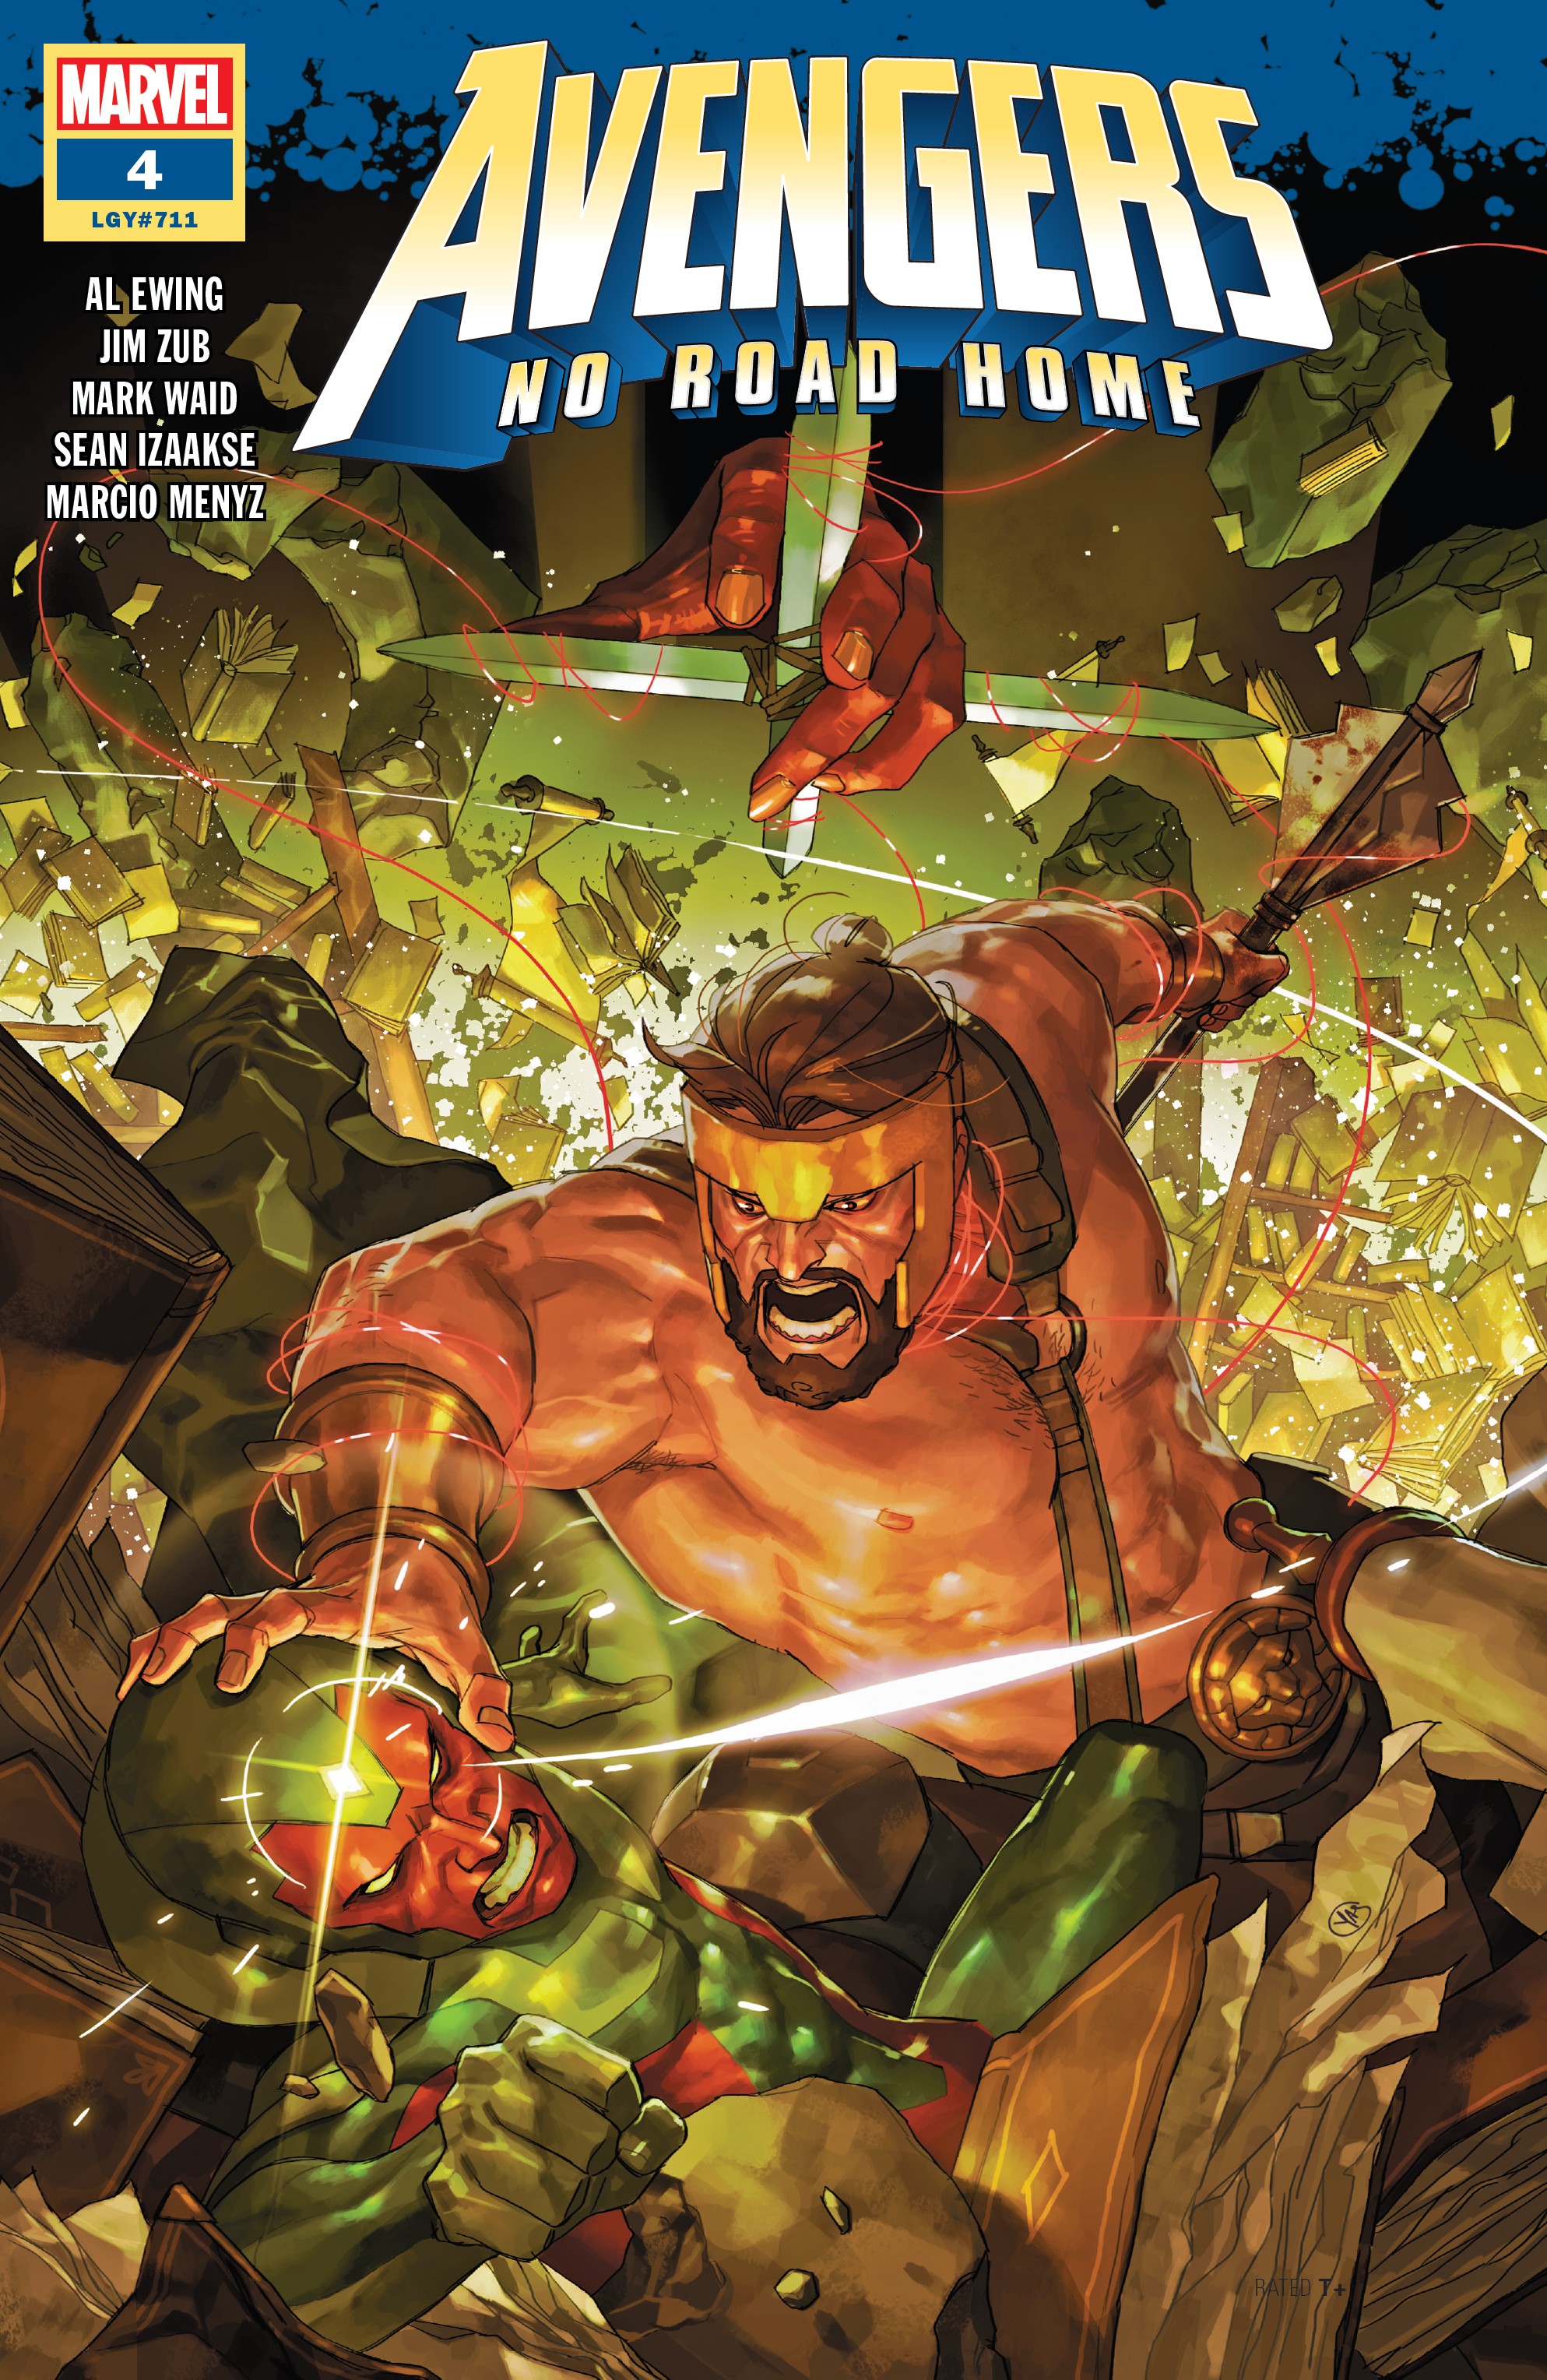 Read online Avengers No Road Home comic -  Issue #4 - 1